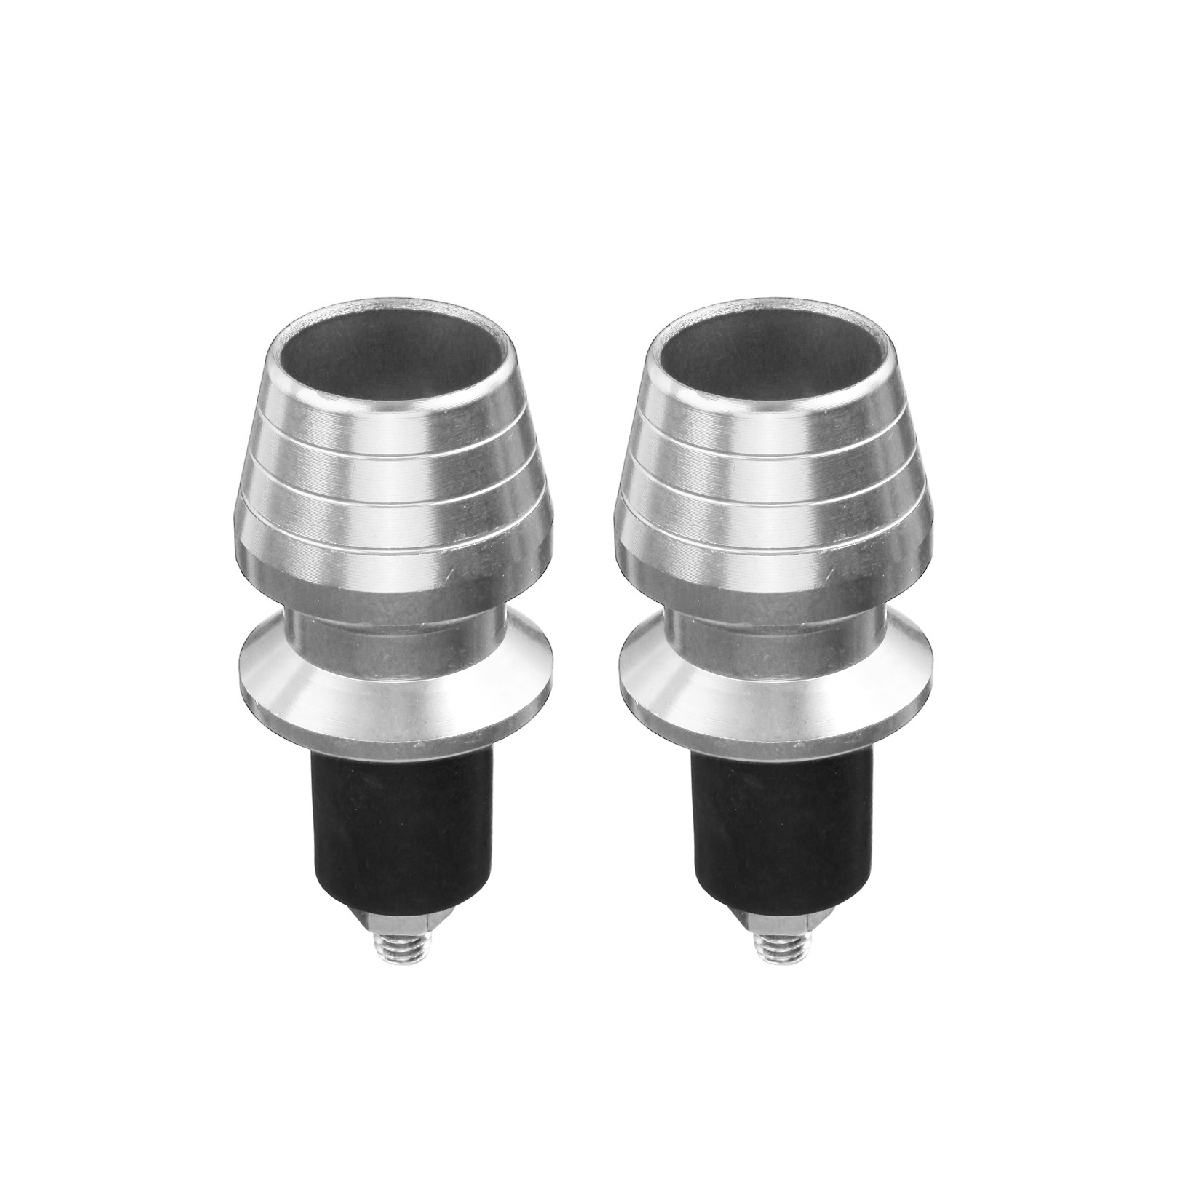 7/8 Inch 22Mm Motorcycle Handle Bar Ends Plugs Aluminum Sporting Grip Caps